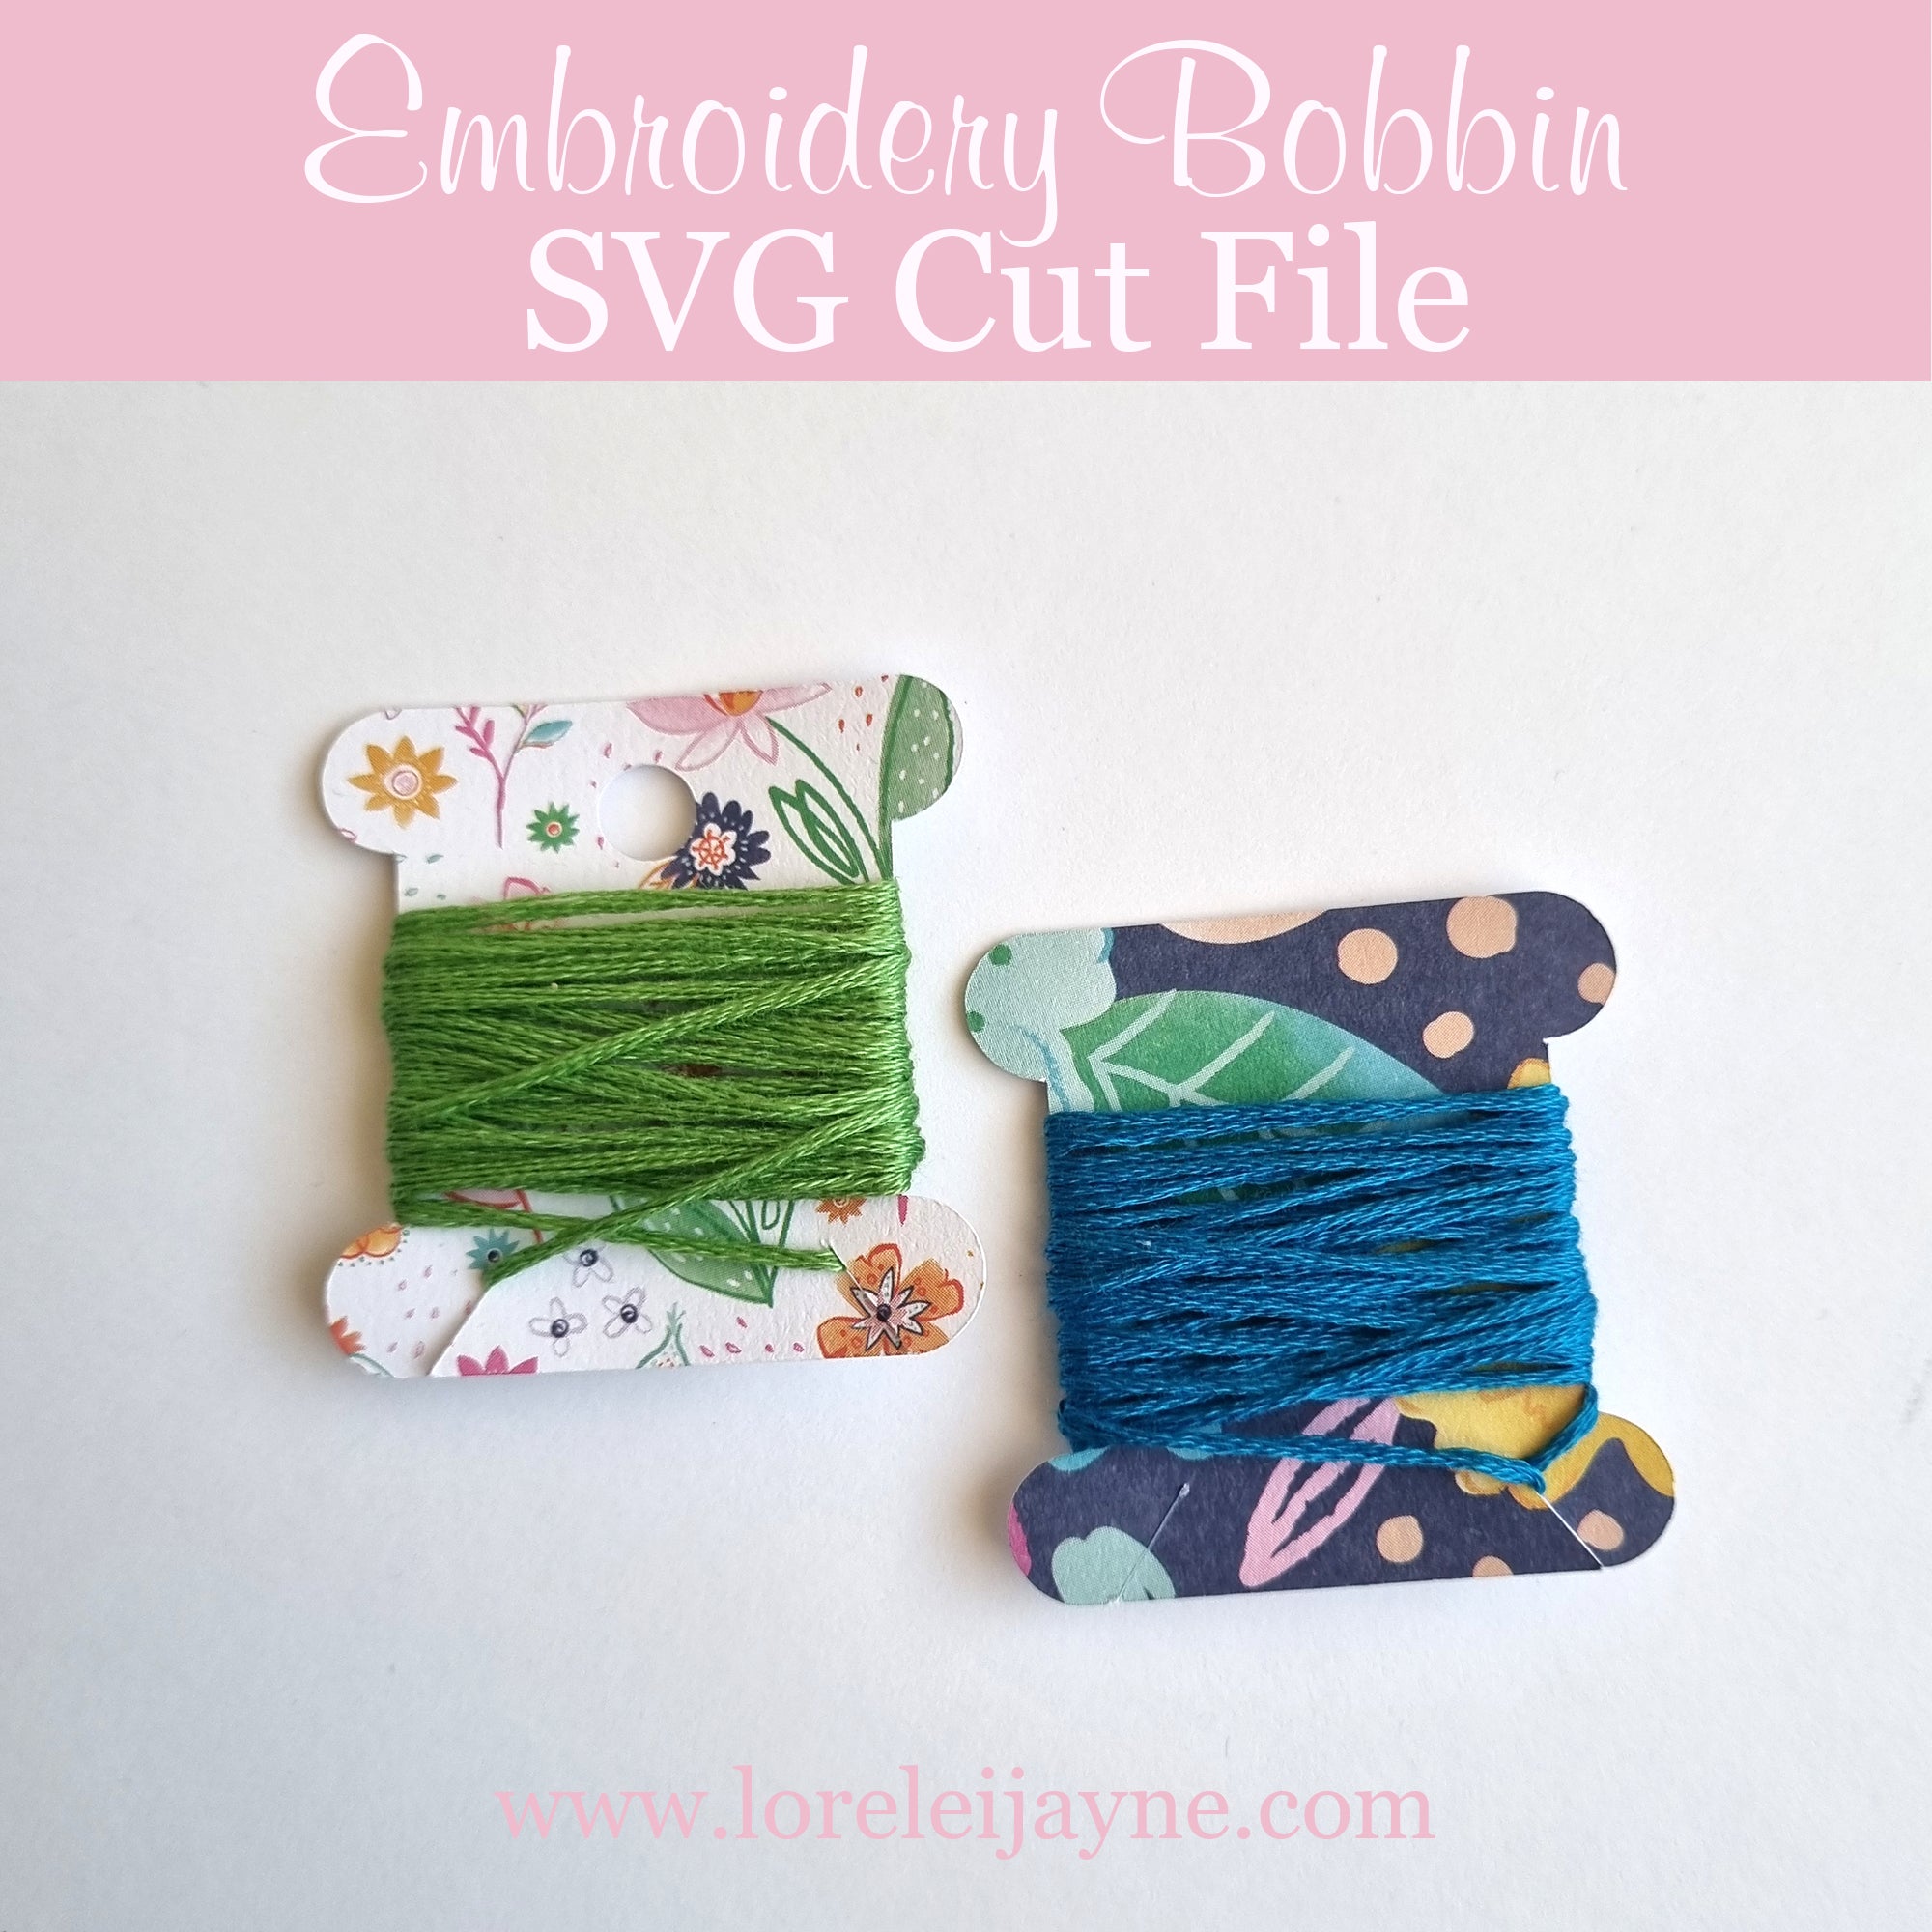 Embroidery Bobbin SVG Cut File and Printable.